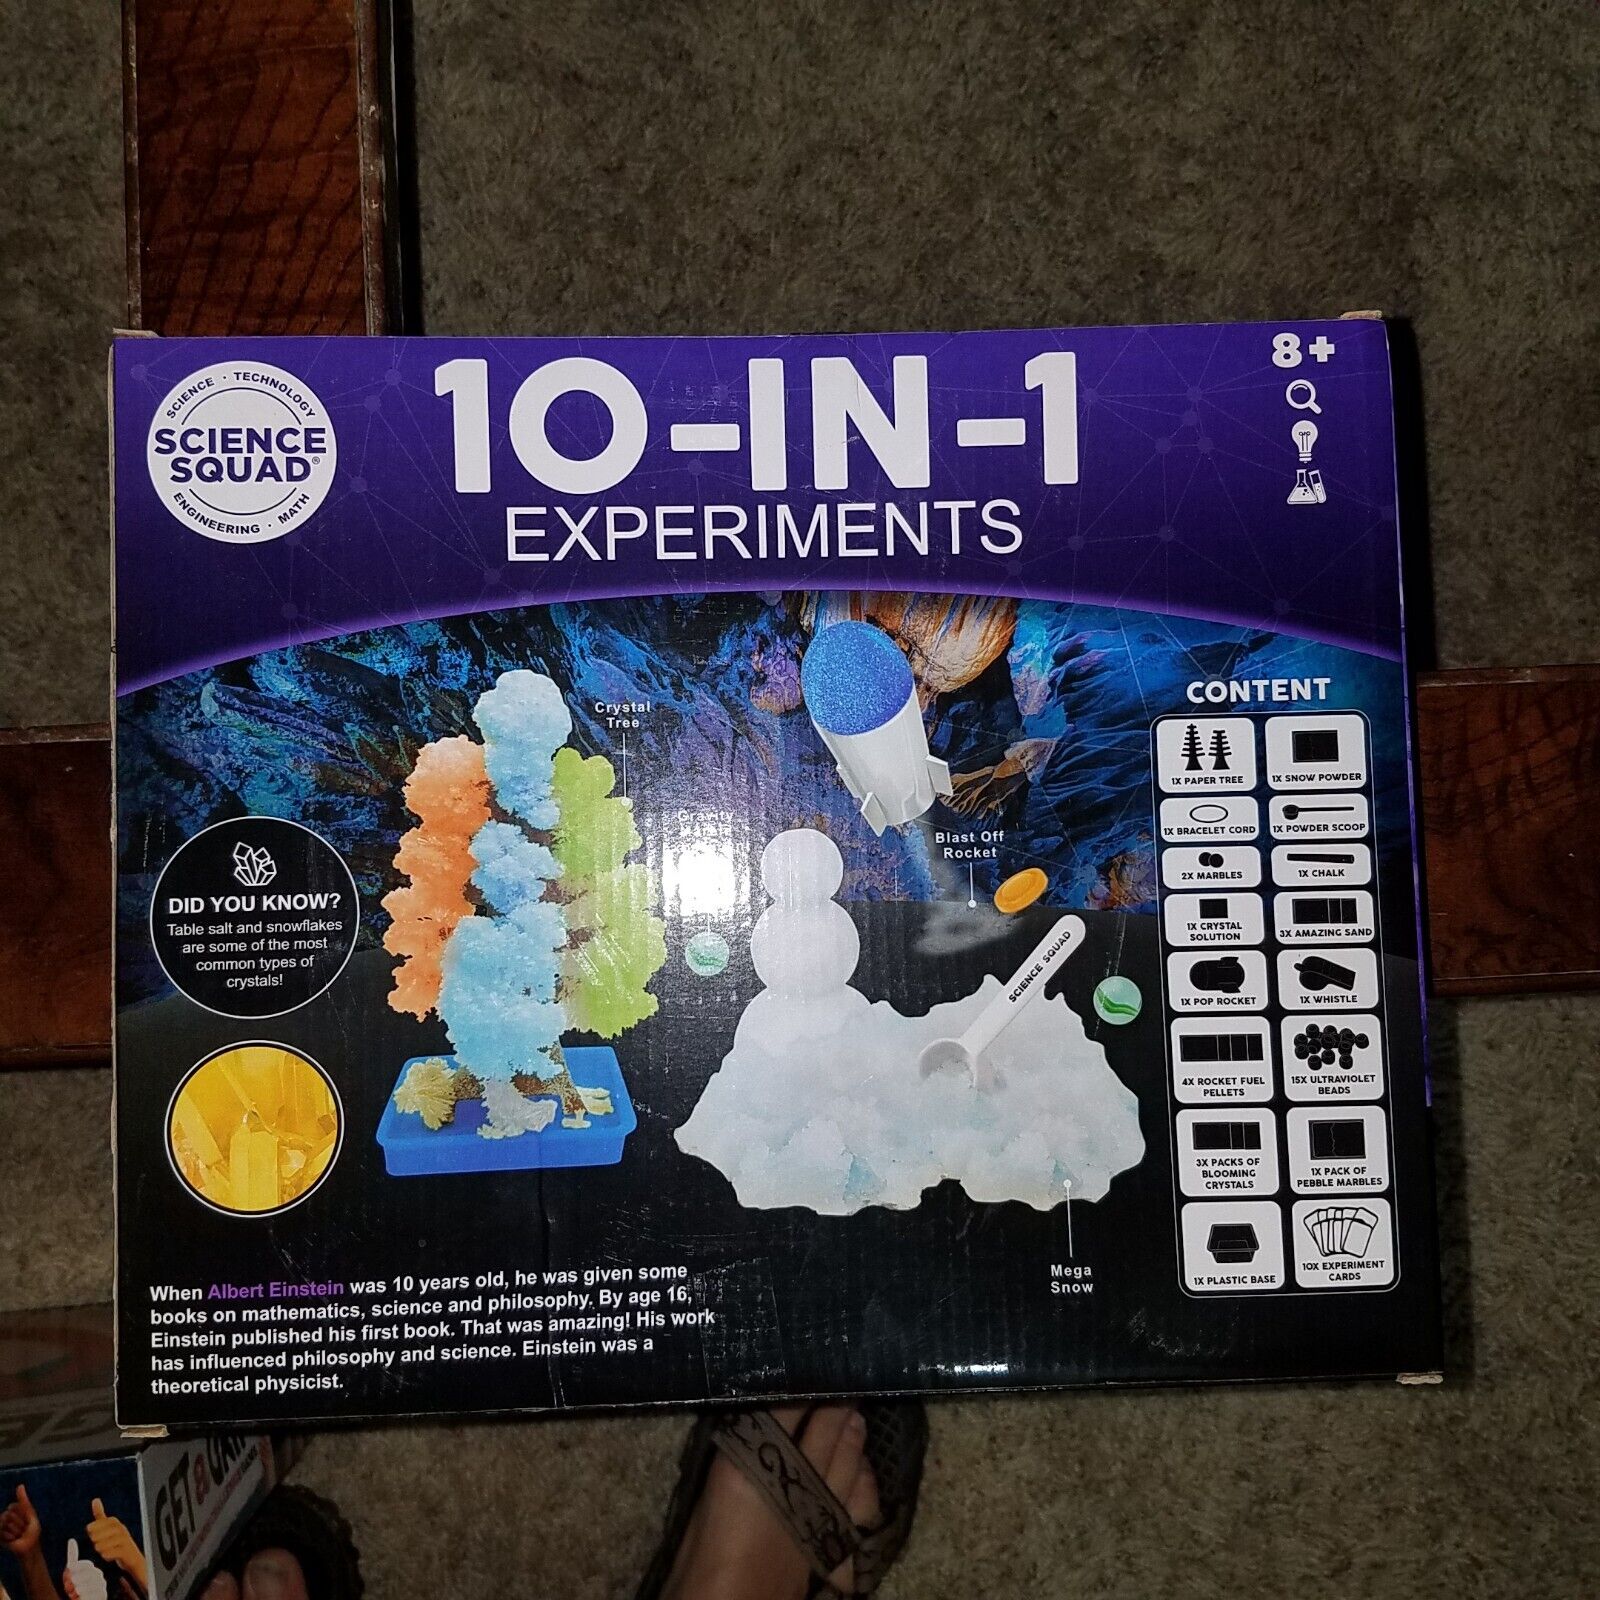 STEM 10 IN 1 EXPERIMENTS KIT SCIENCE SQUAD - CRYSTALS UV-BEADS ROCKET NEW